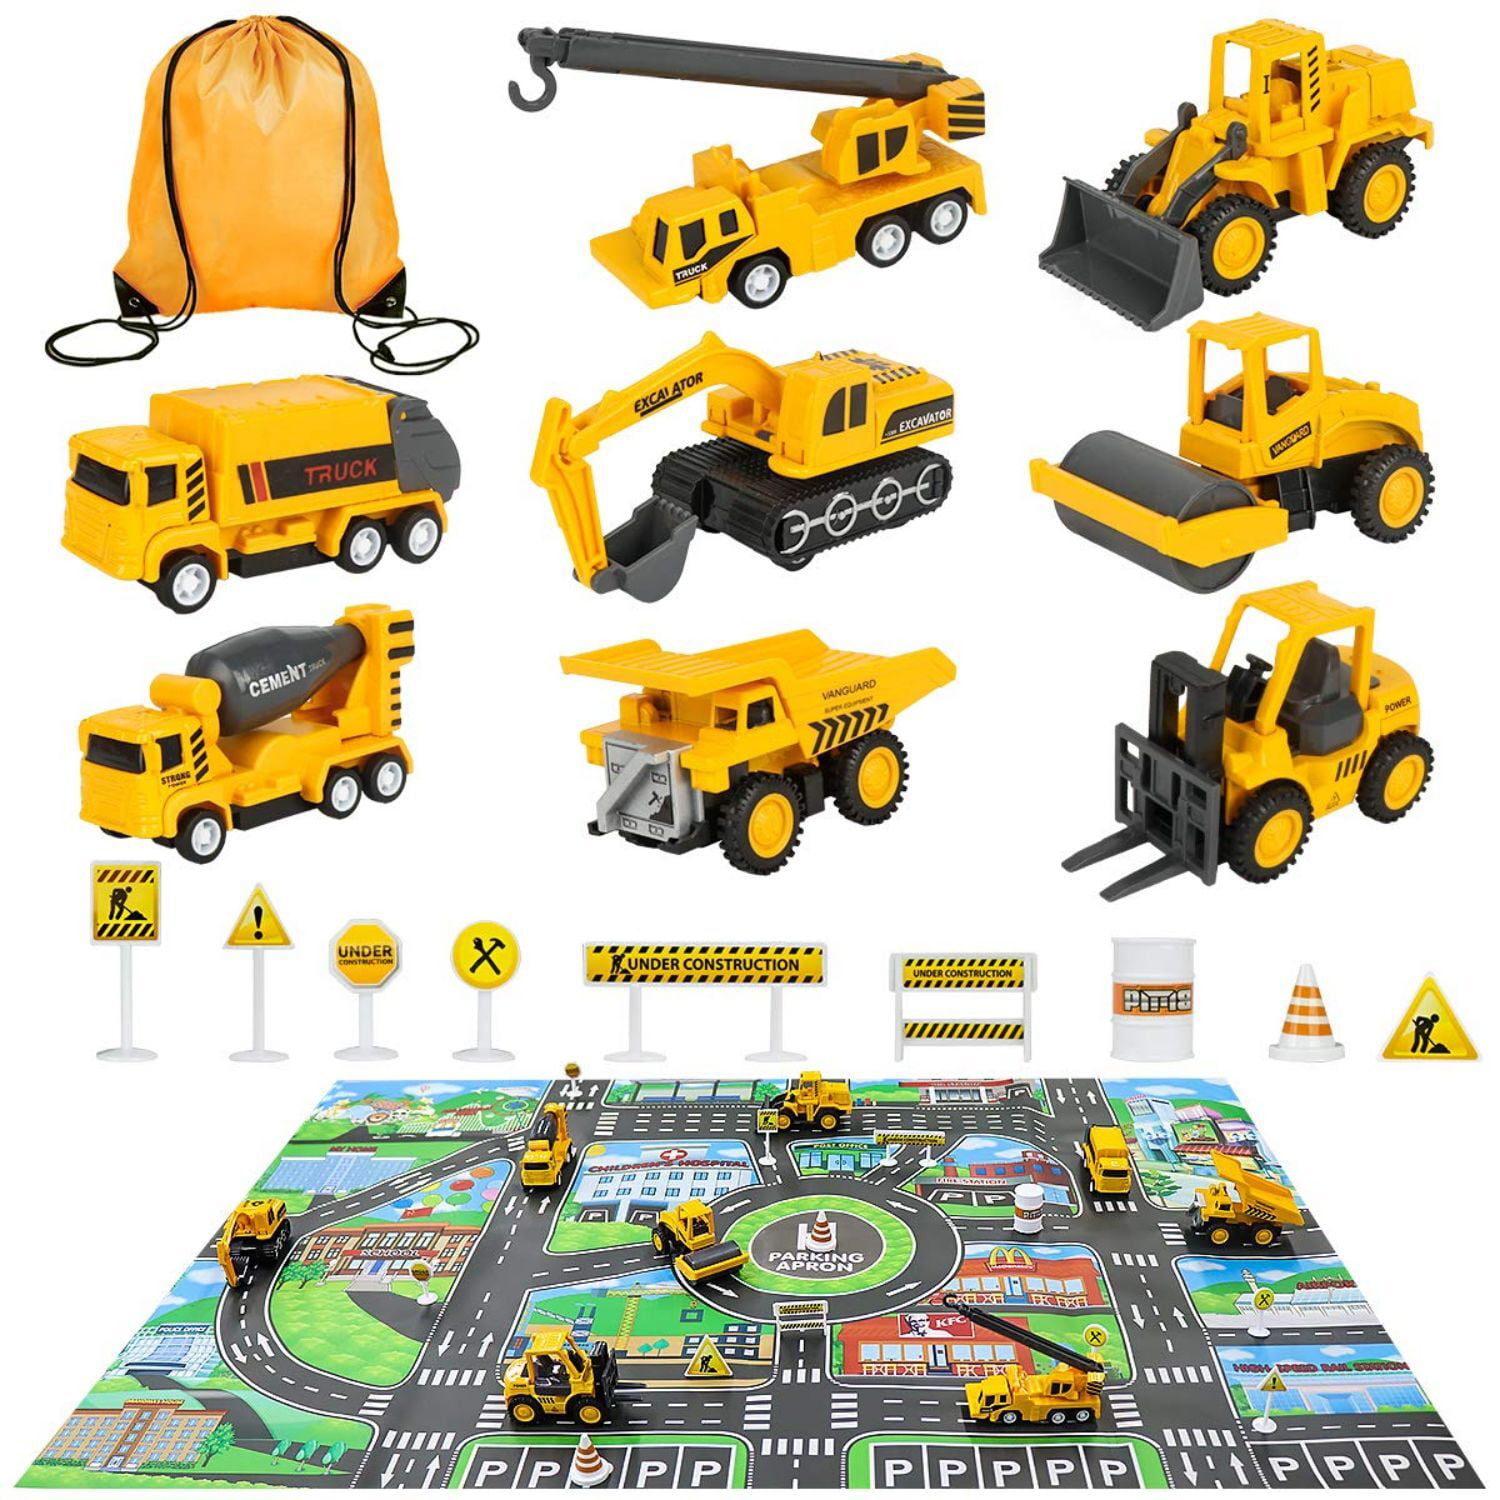 1x Engineering Construction Truck Excavator Digger Vehicle Car Toy Kids Boy Gift 